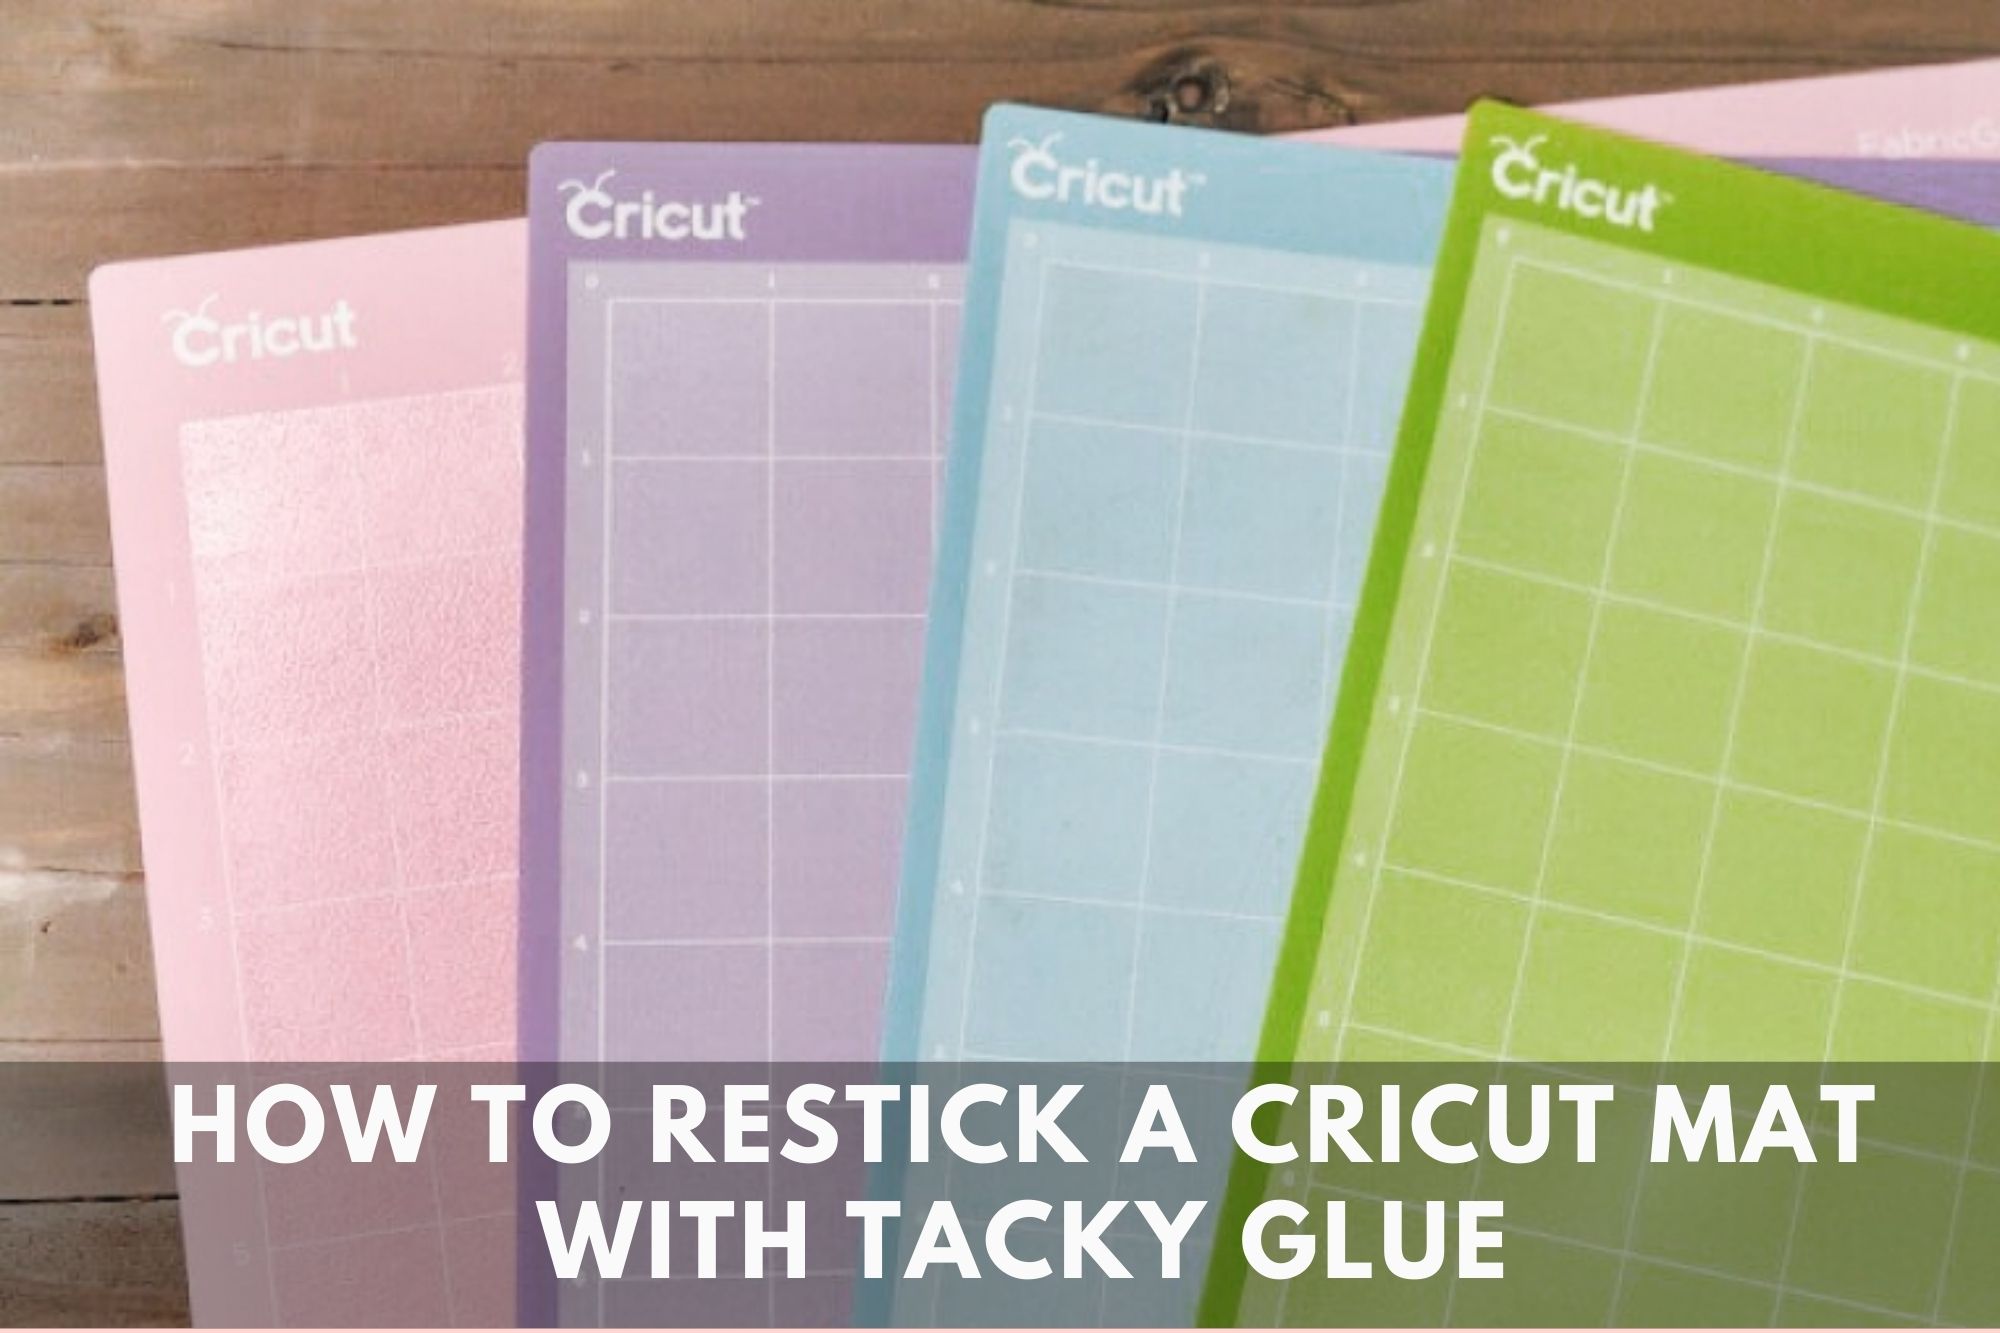 How To Restick A Cricut Mat With Tacky Glue